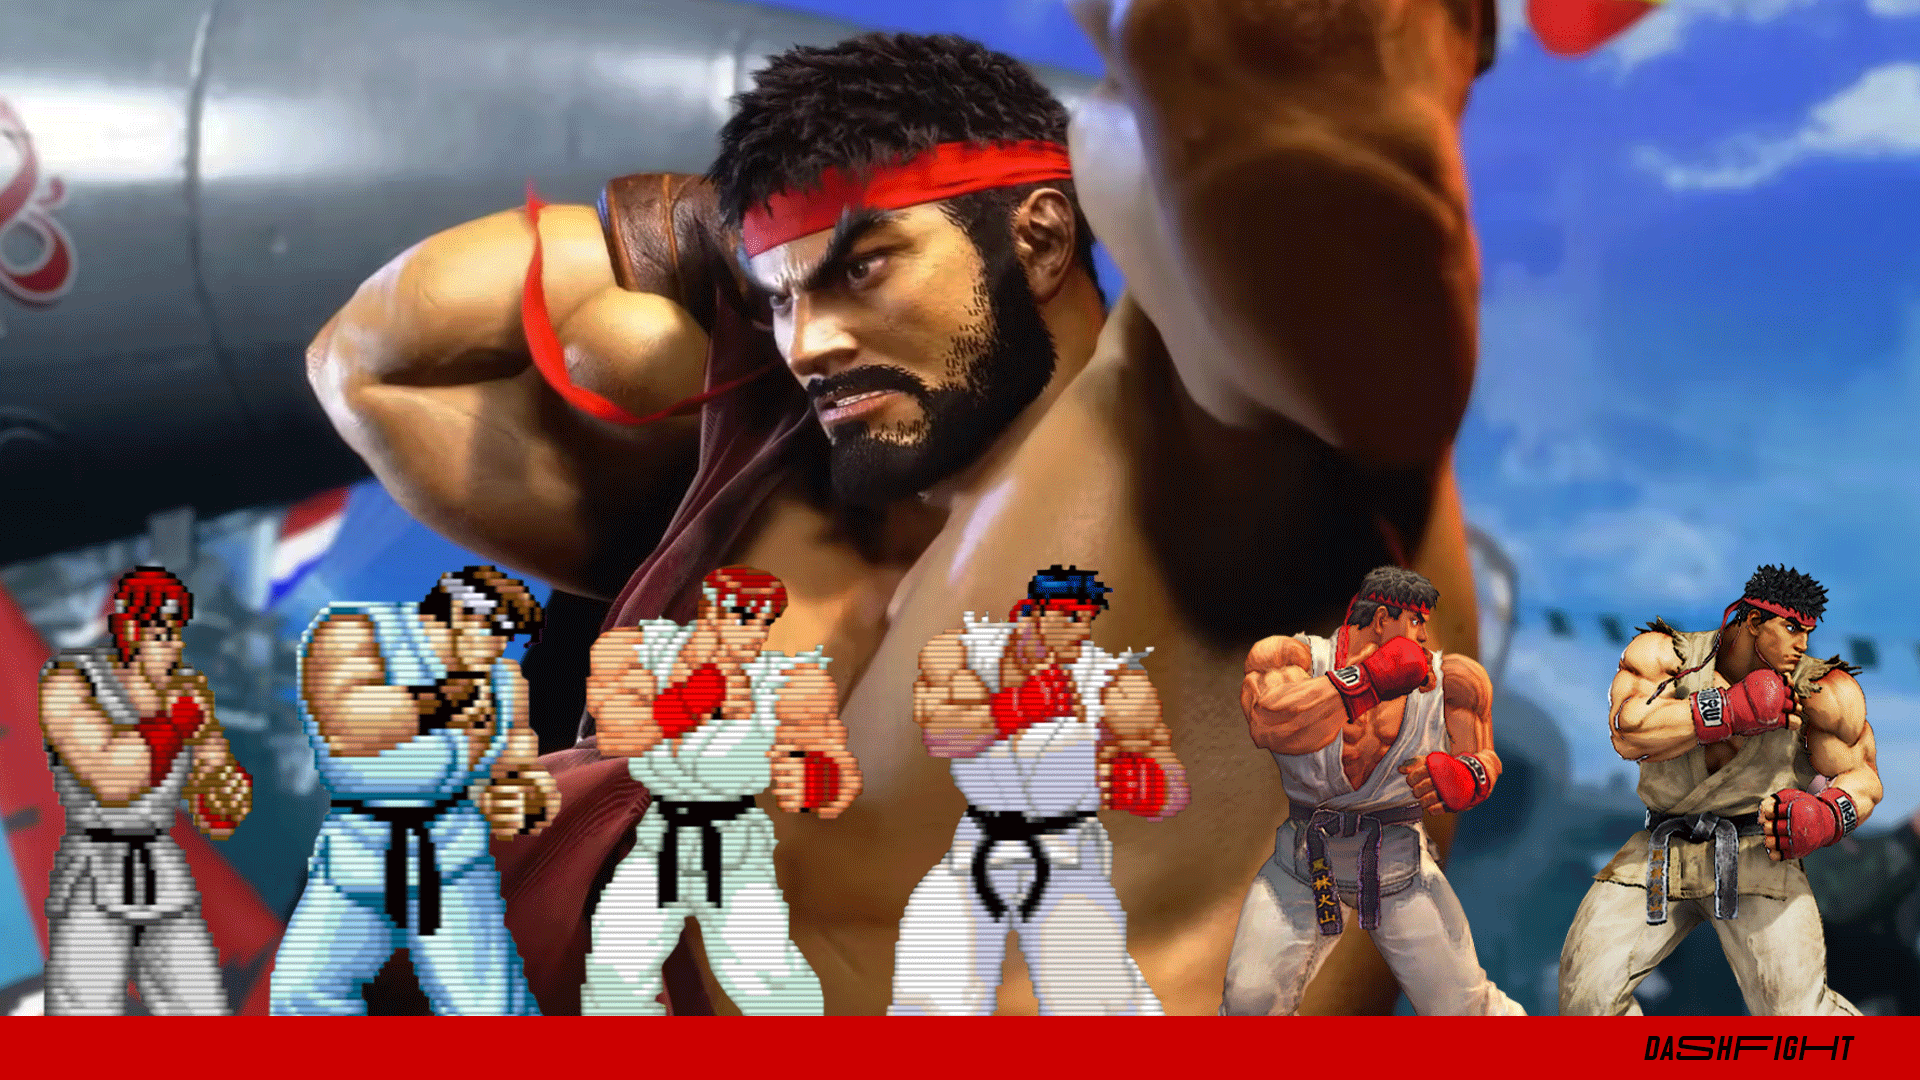 Ryu Street Fighter 6 Complete Guide - Moves, Backstory & Pro Play Guide